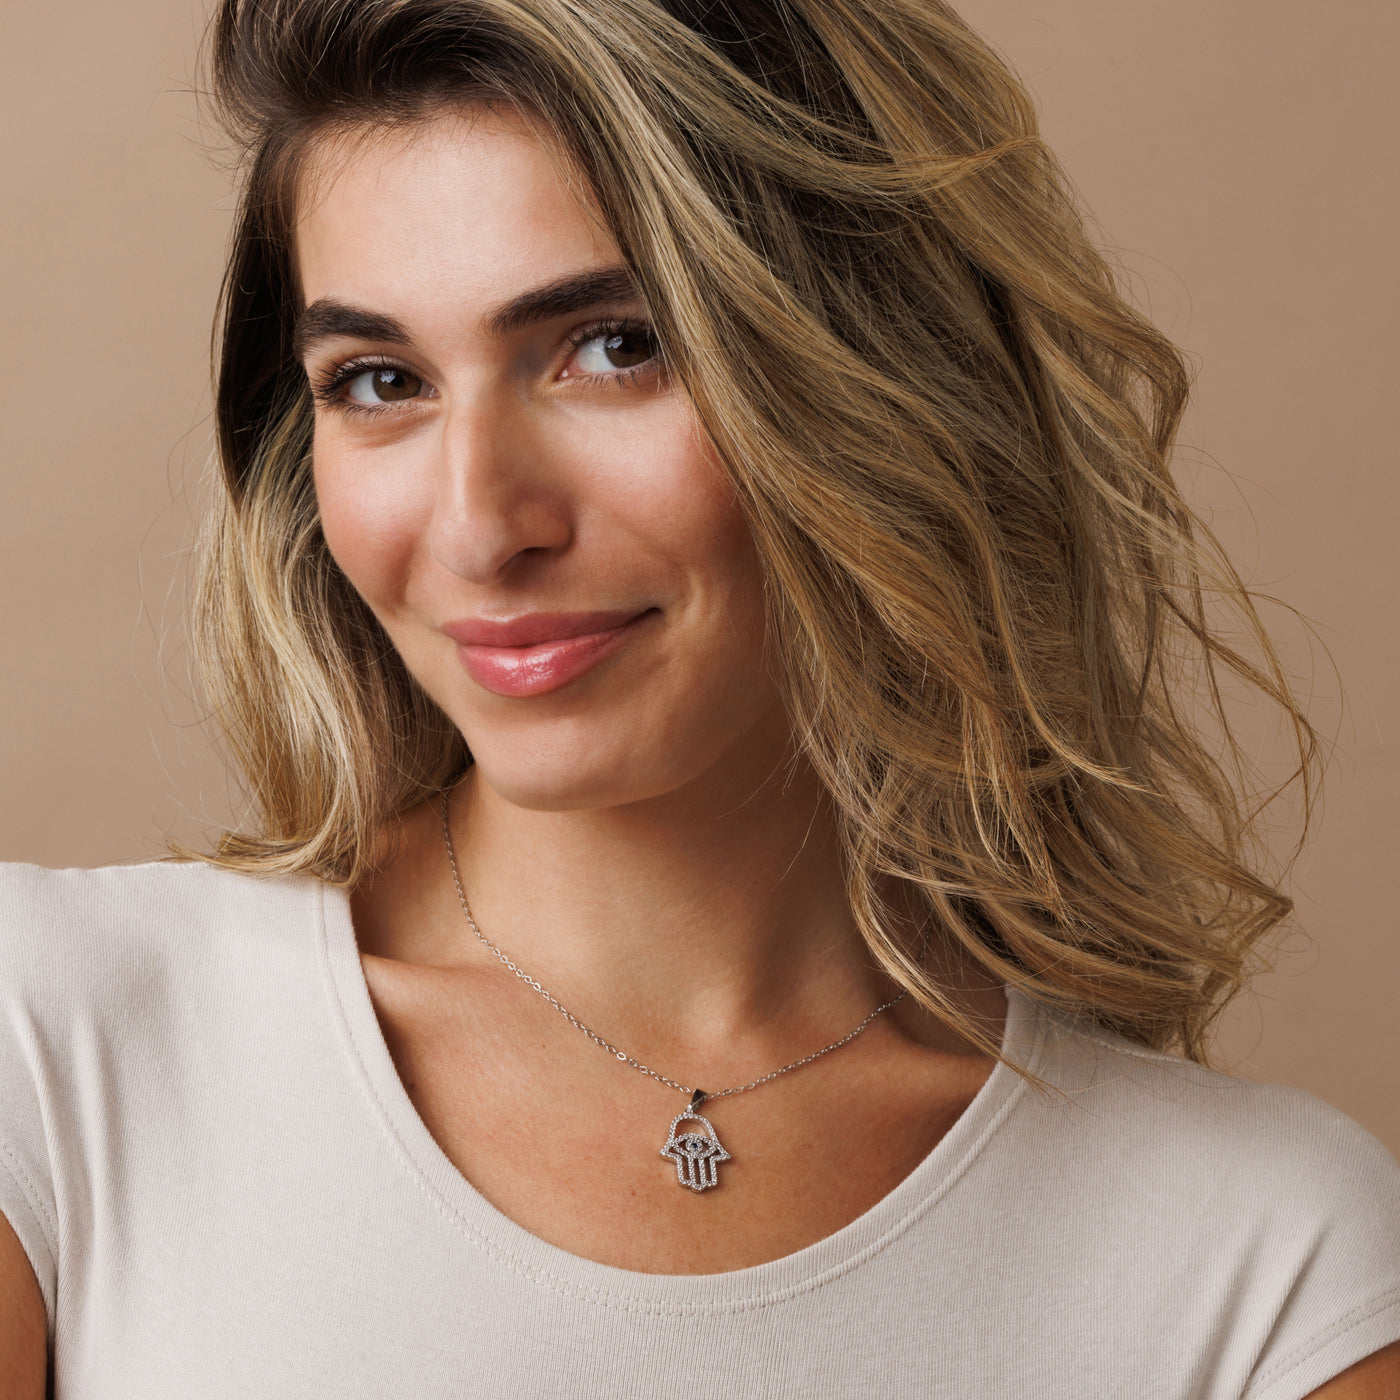 Hamsa Necklace with an Exquisite Design - Leah